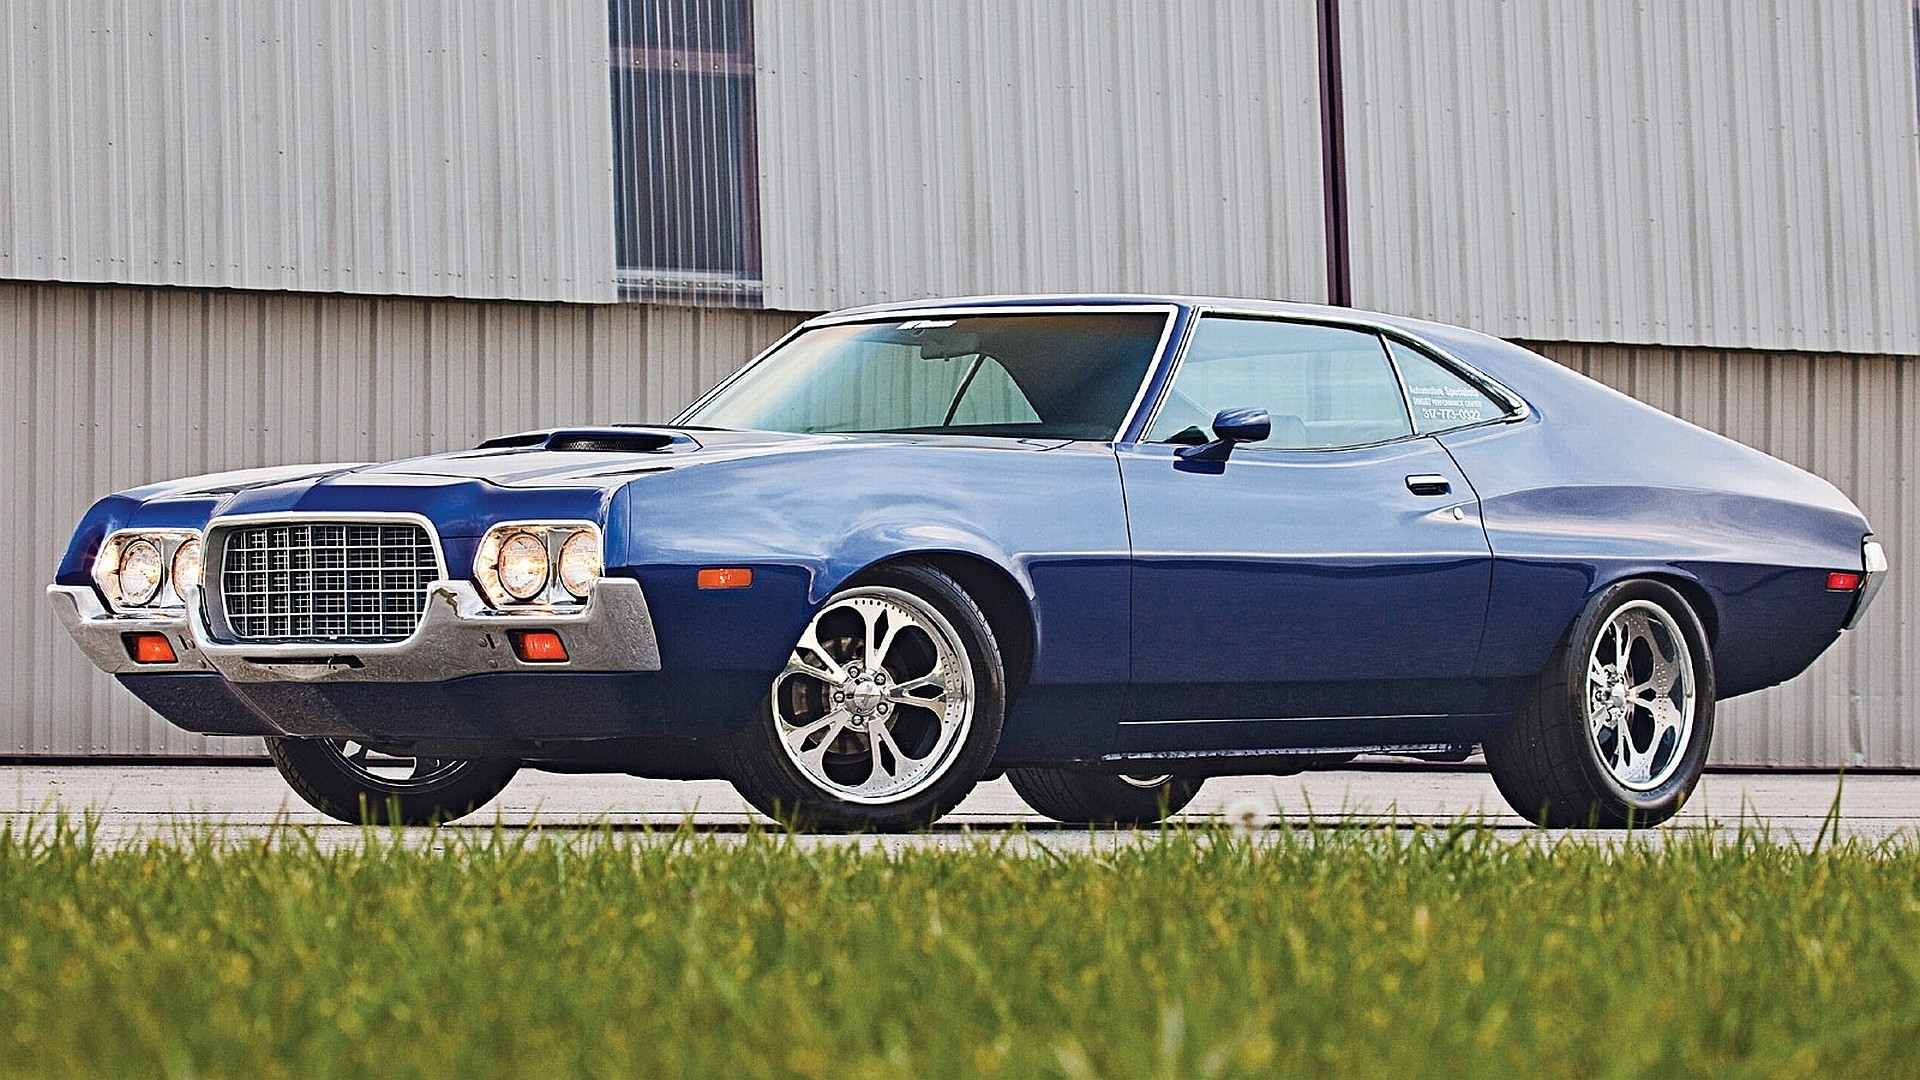 General 1920x1080 car Ford blue cars vehicle Ford Torino muscle cars American cars